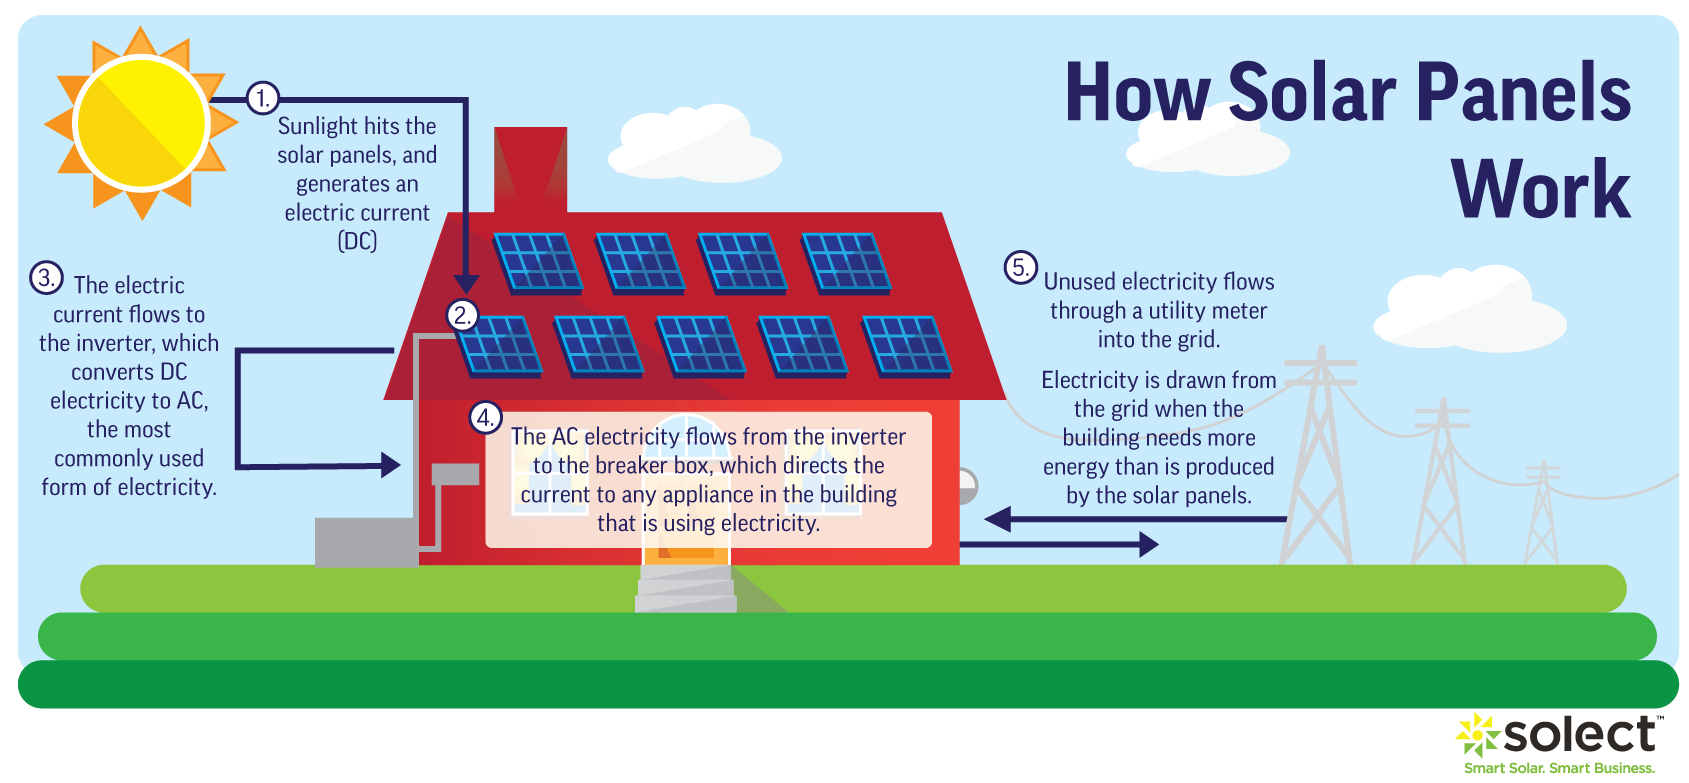 Solar Energy Diagram In This Small Diagram We Can See How Solar Energy Works Today